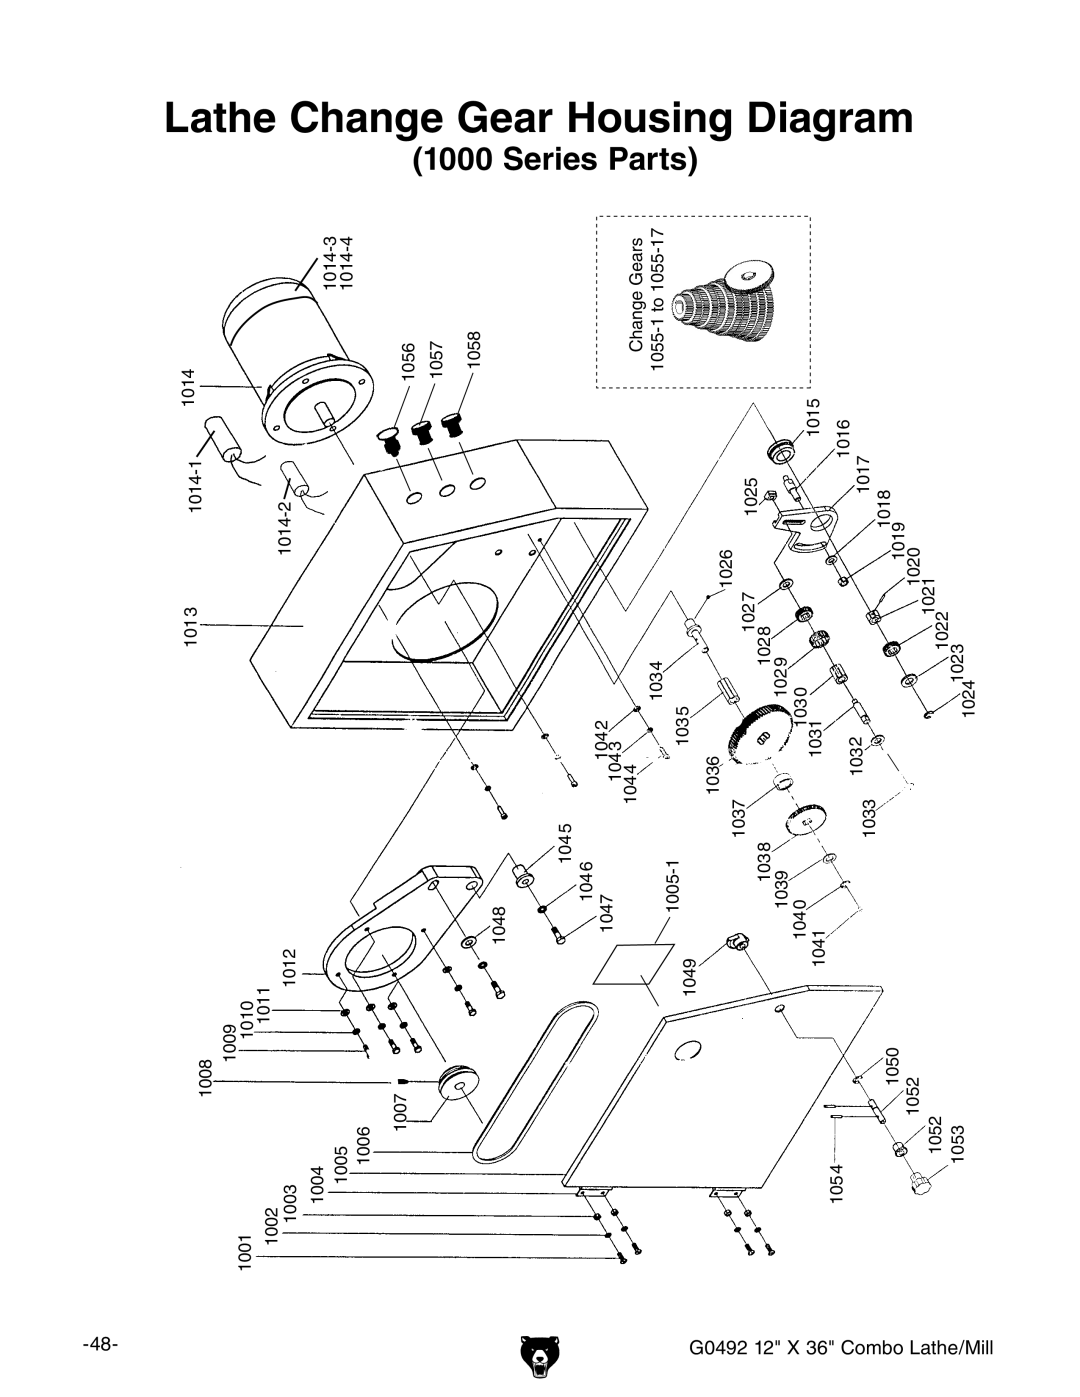 Grizzly owner manual Lathe Change Gear Housing Diagram 1000 Series Parts, G0492 12 X 36 Combo Lathe/Mill 